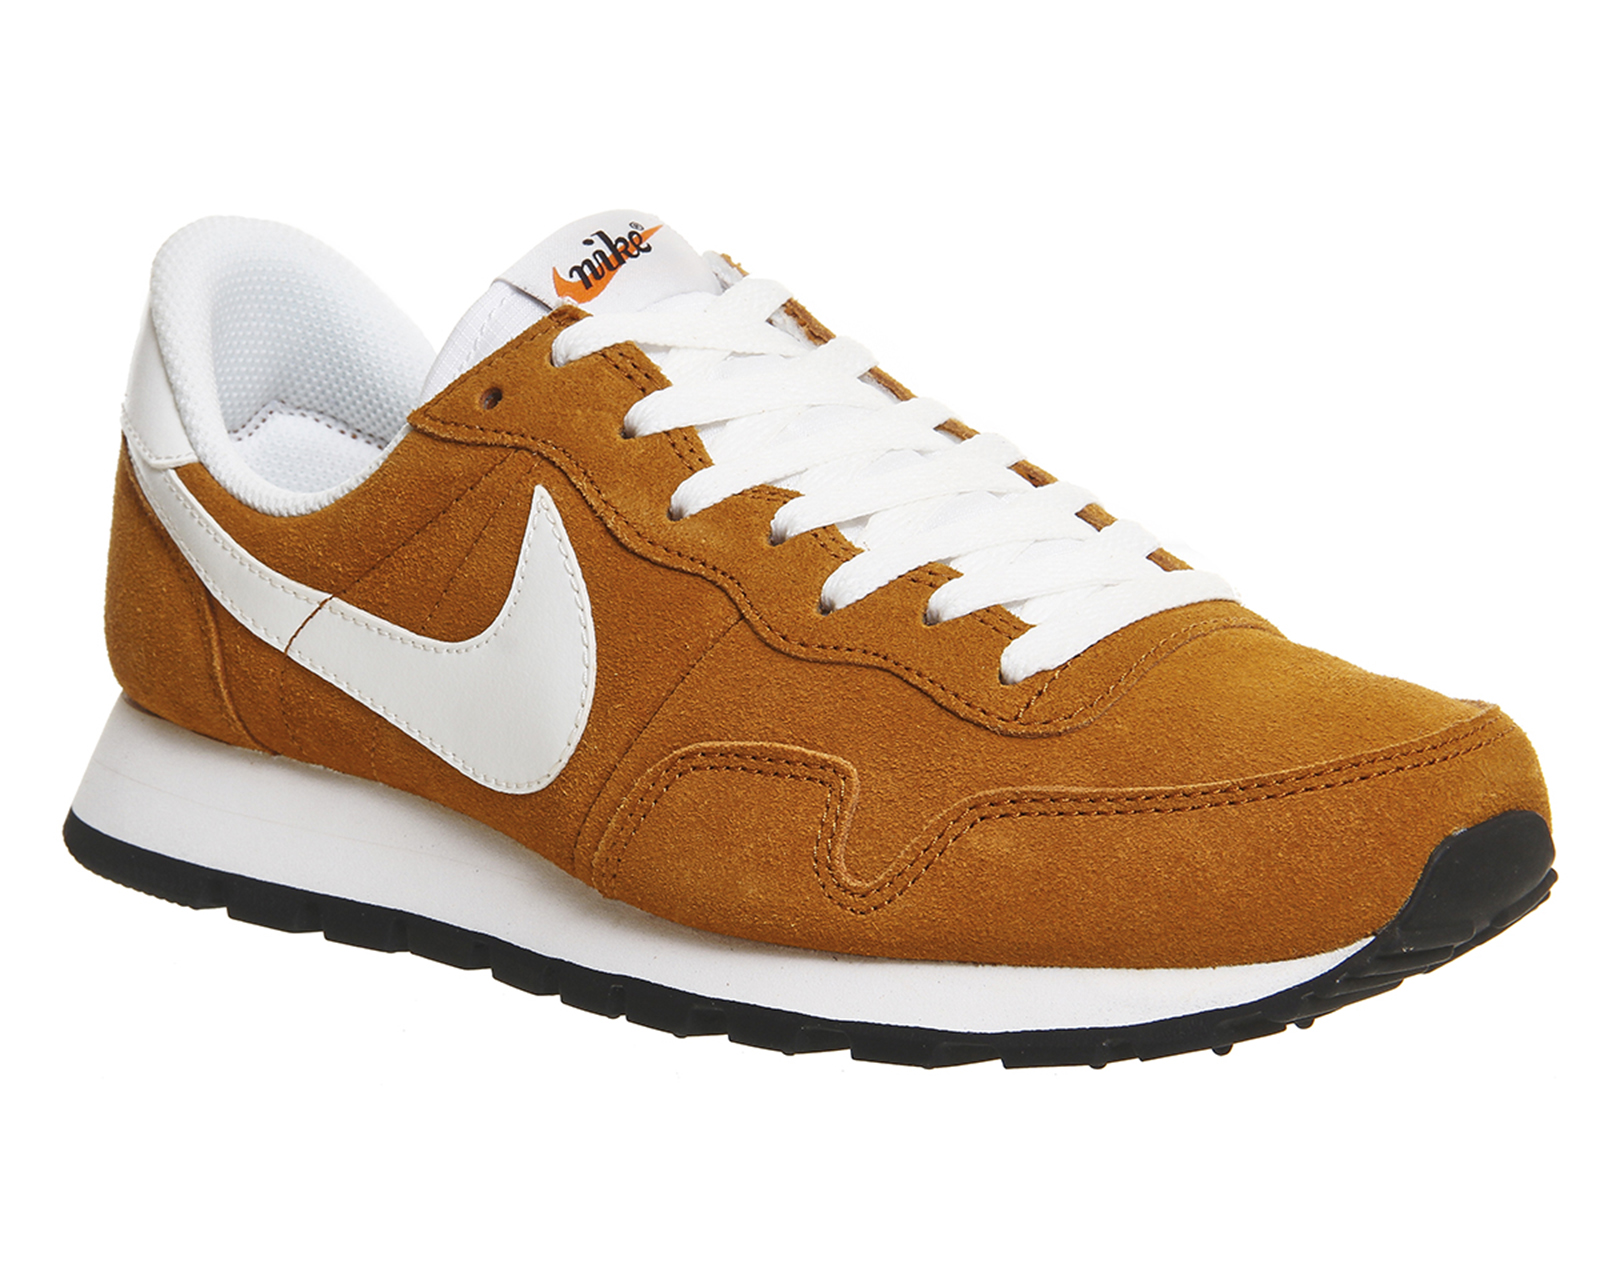 Nike Air Pegasus 83 Trainers Ginger Summit White Leather - Unisex Sports